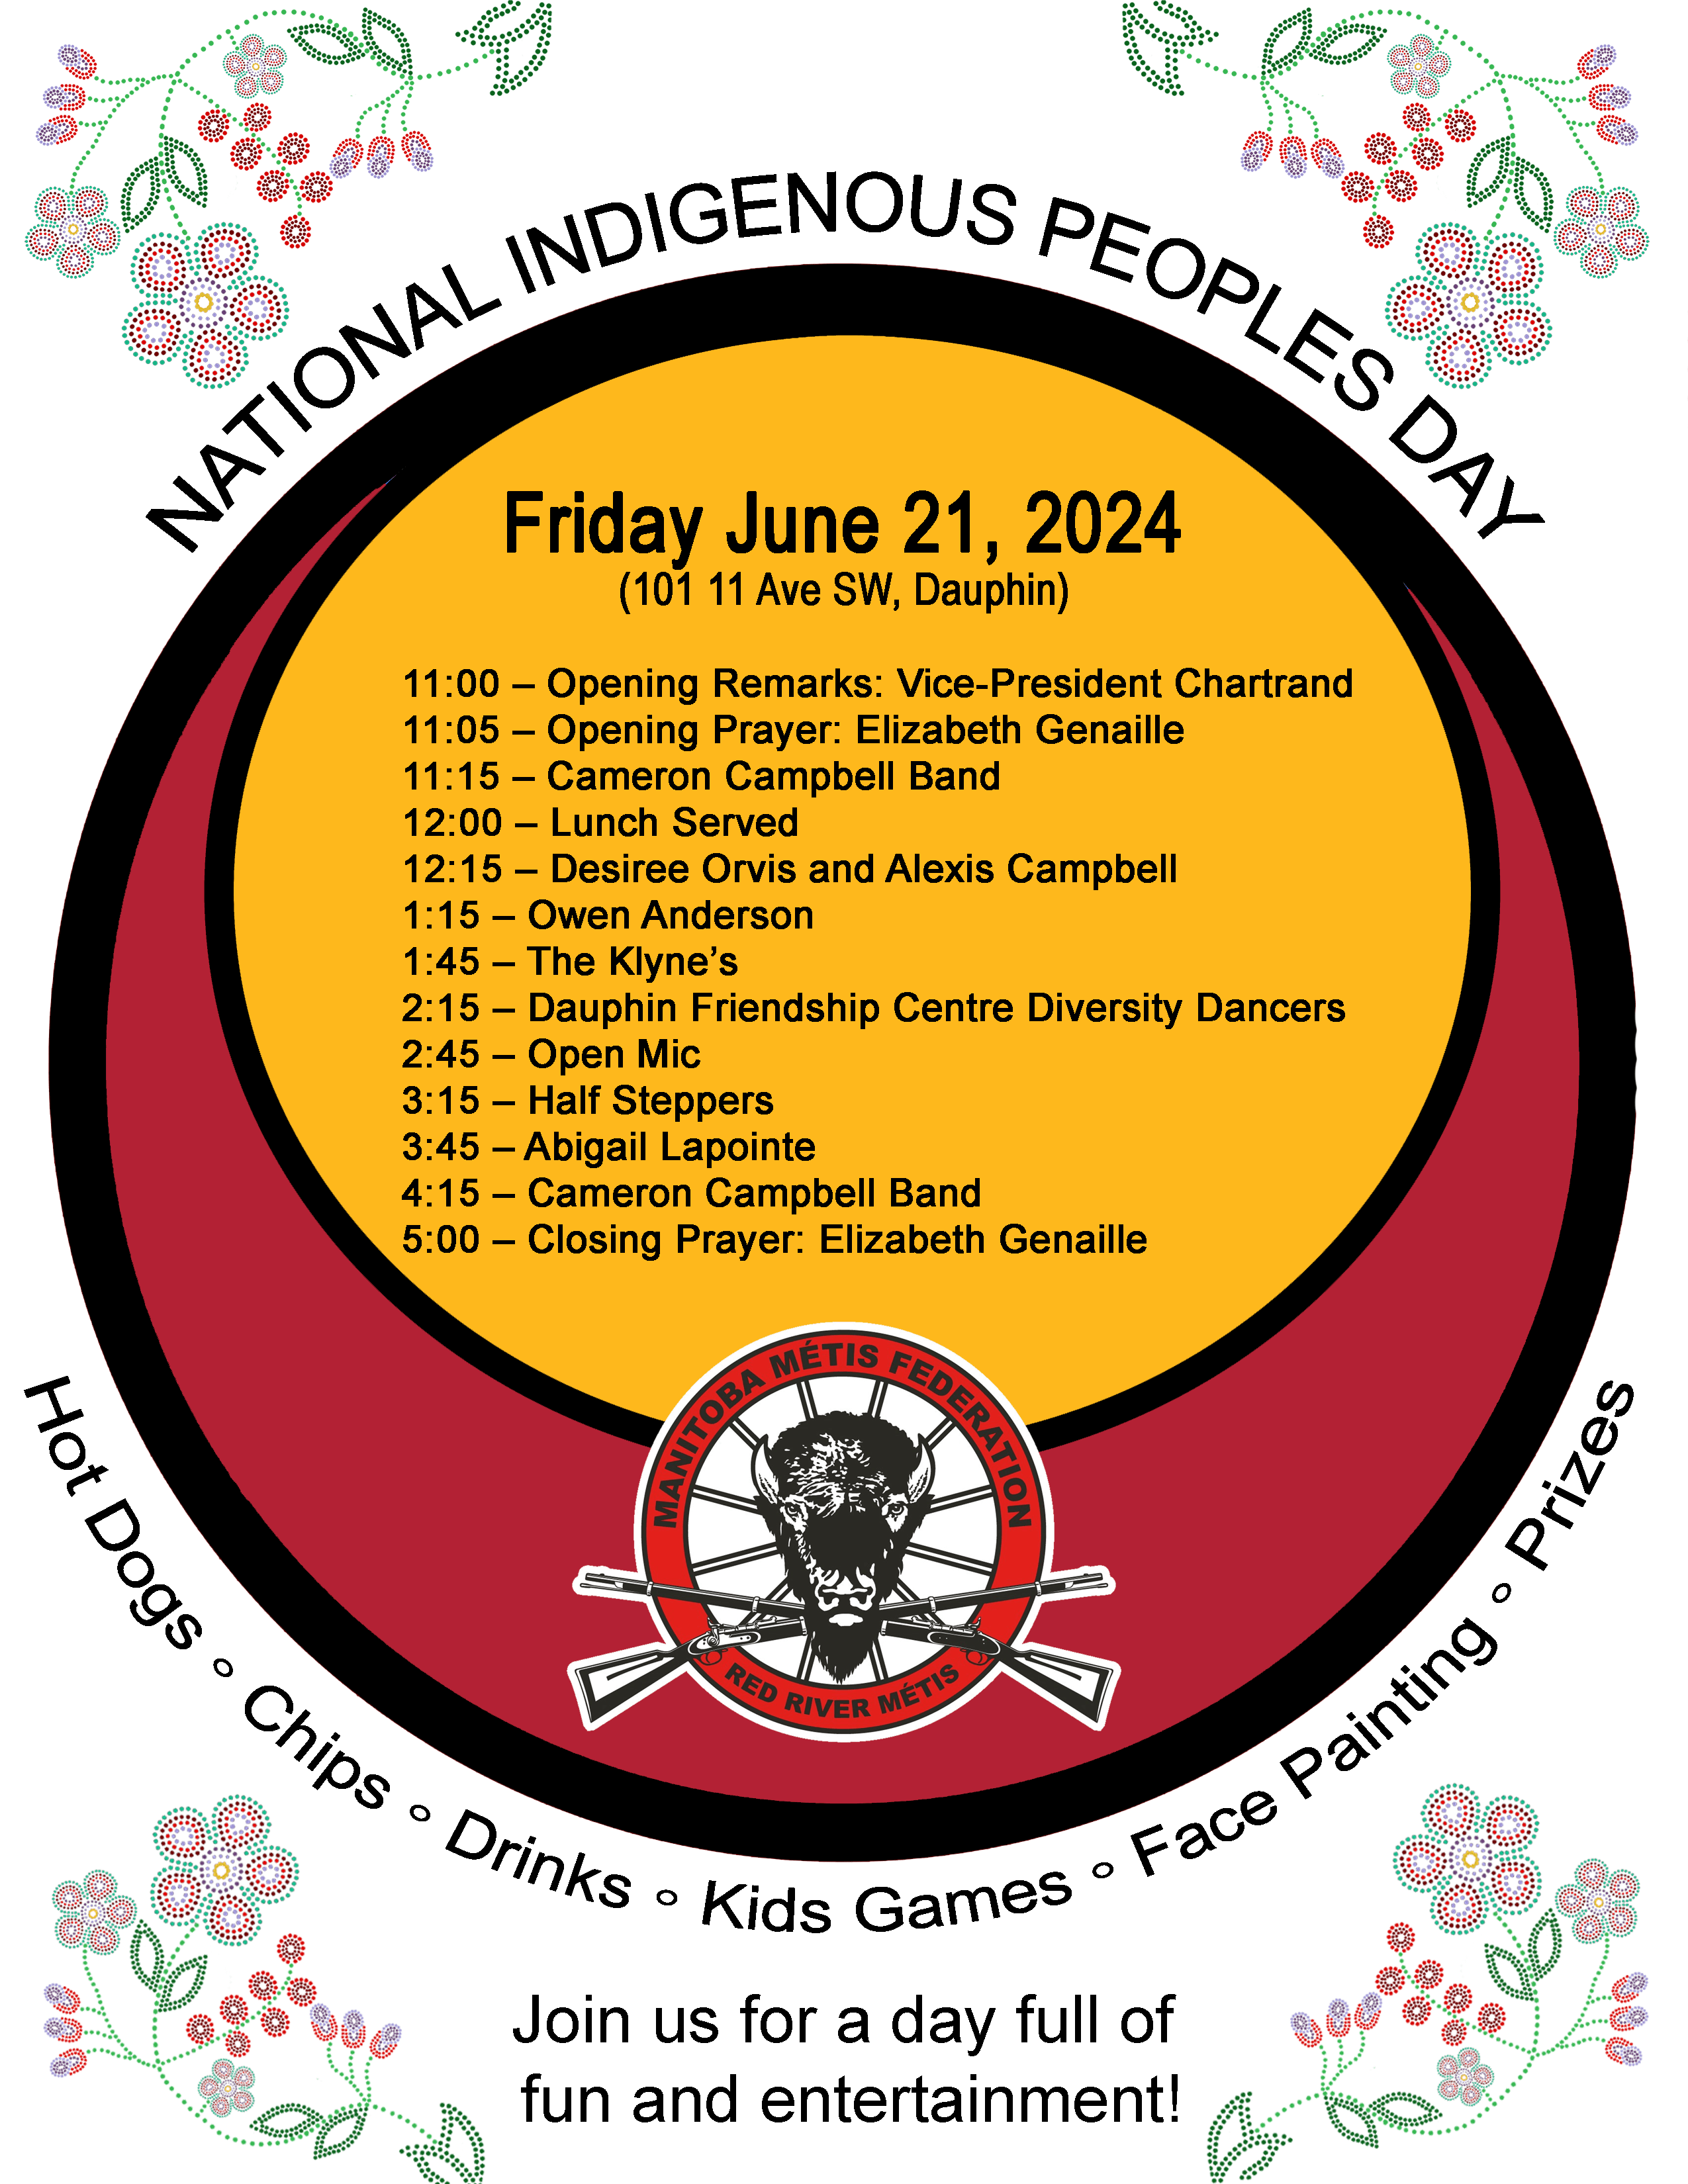 A list of NIPD activities taking place in Dauphin.
